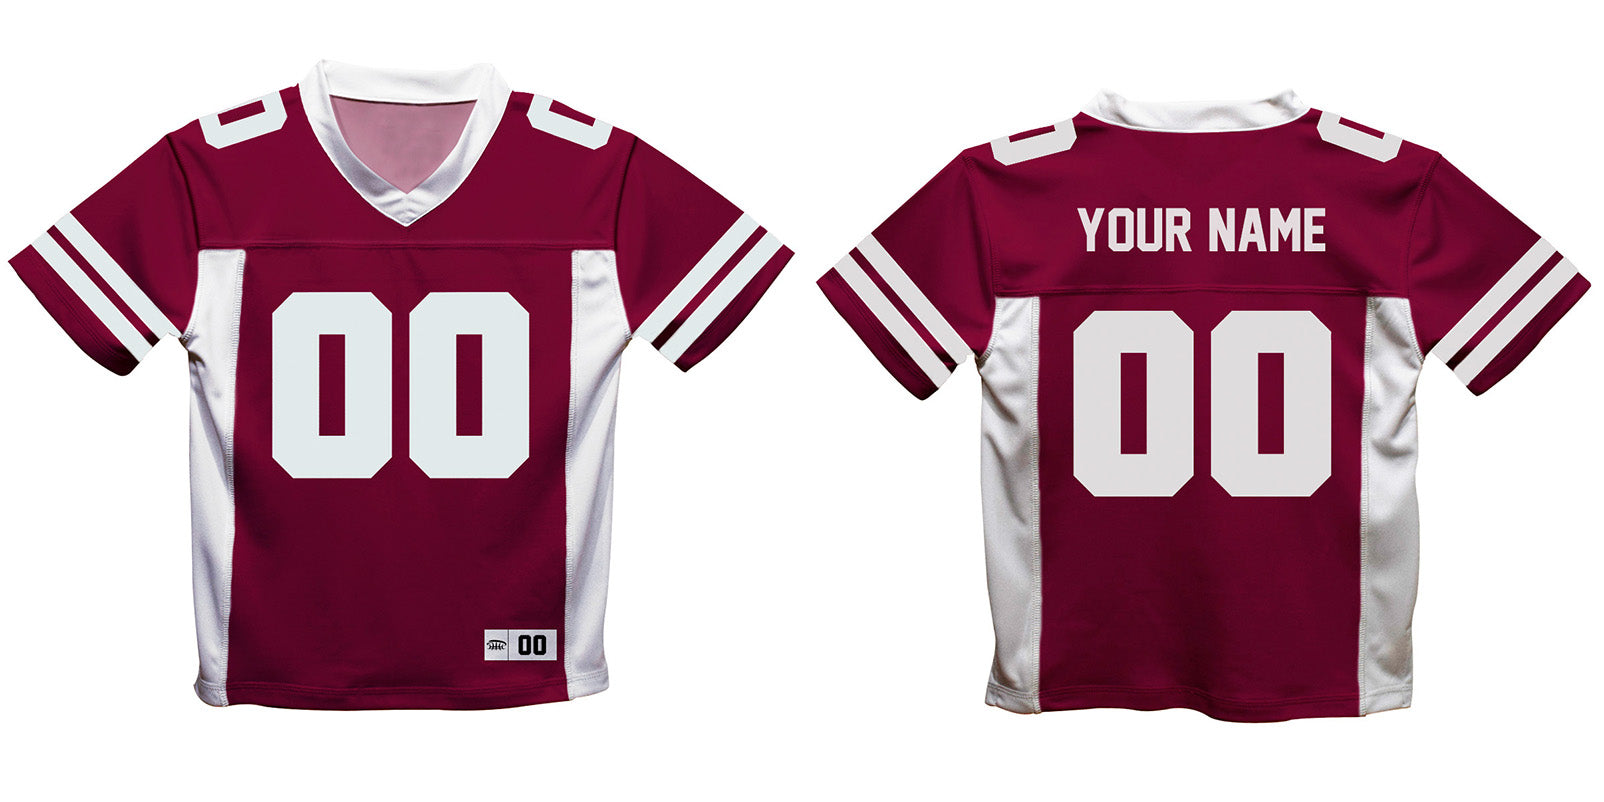 Personalized Name and Number Maroon and White Fashion Football T-Shirt - Wimziy&Co.